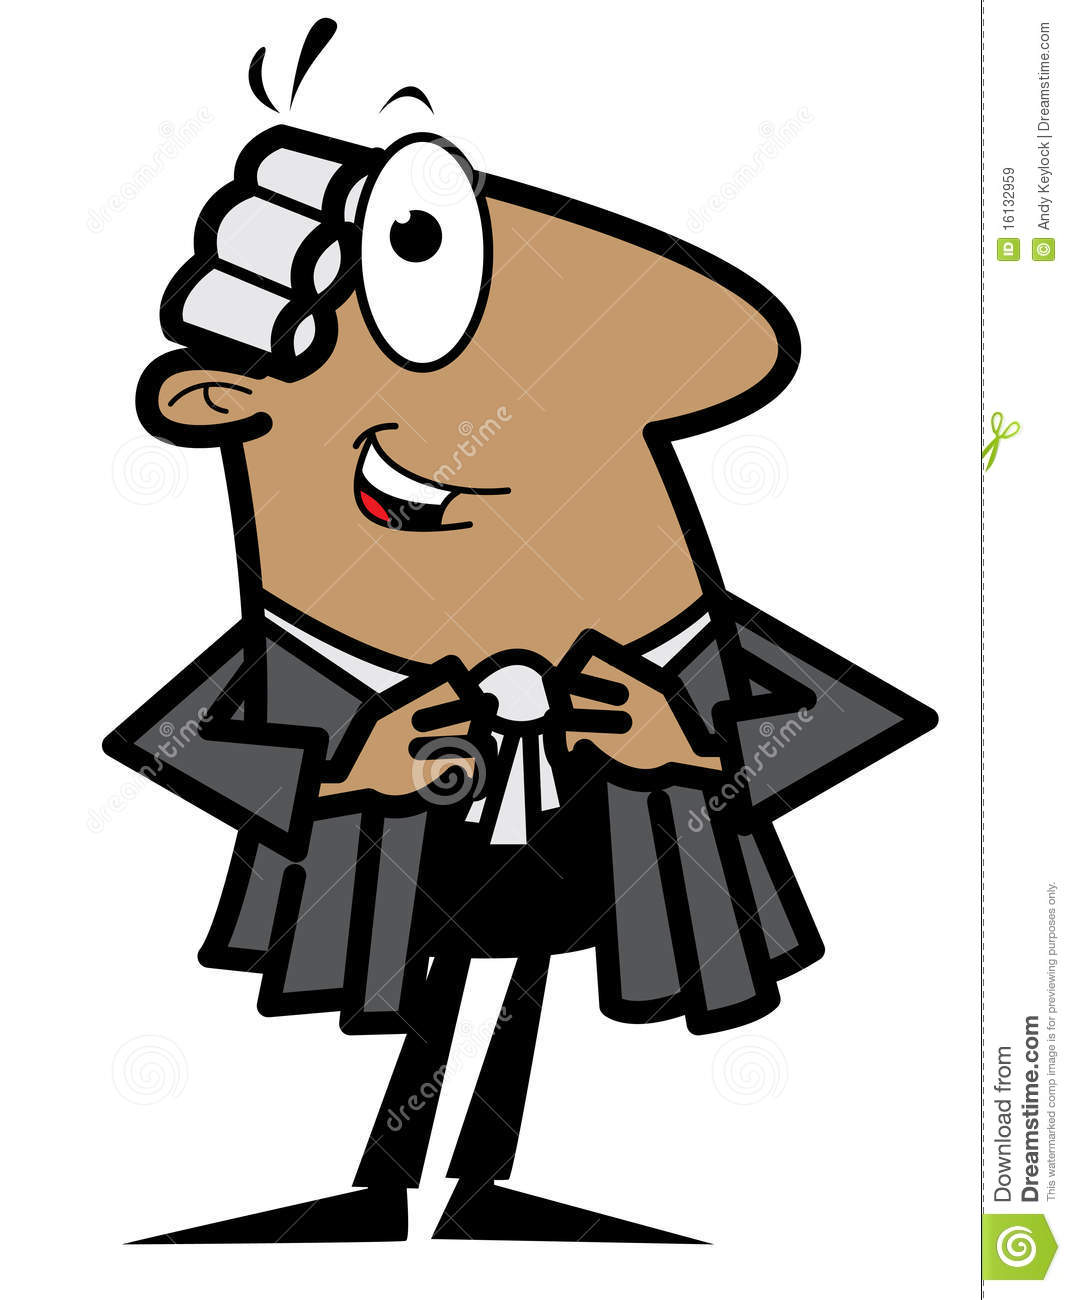 Cartoon Lawyer Royalty Free Stock Images   Image  16132959